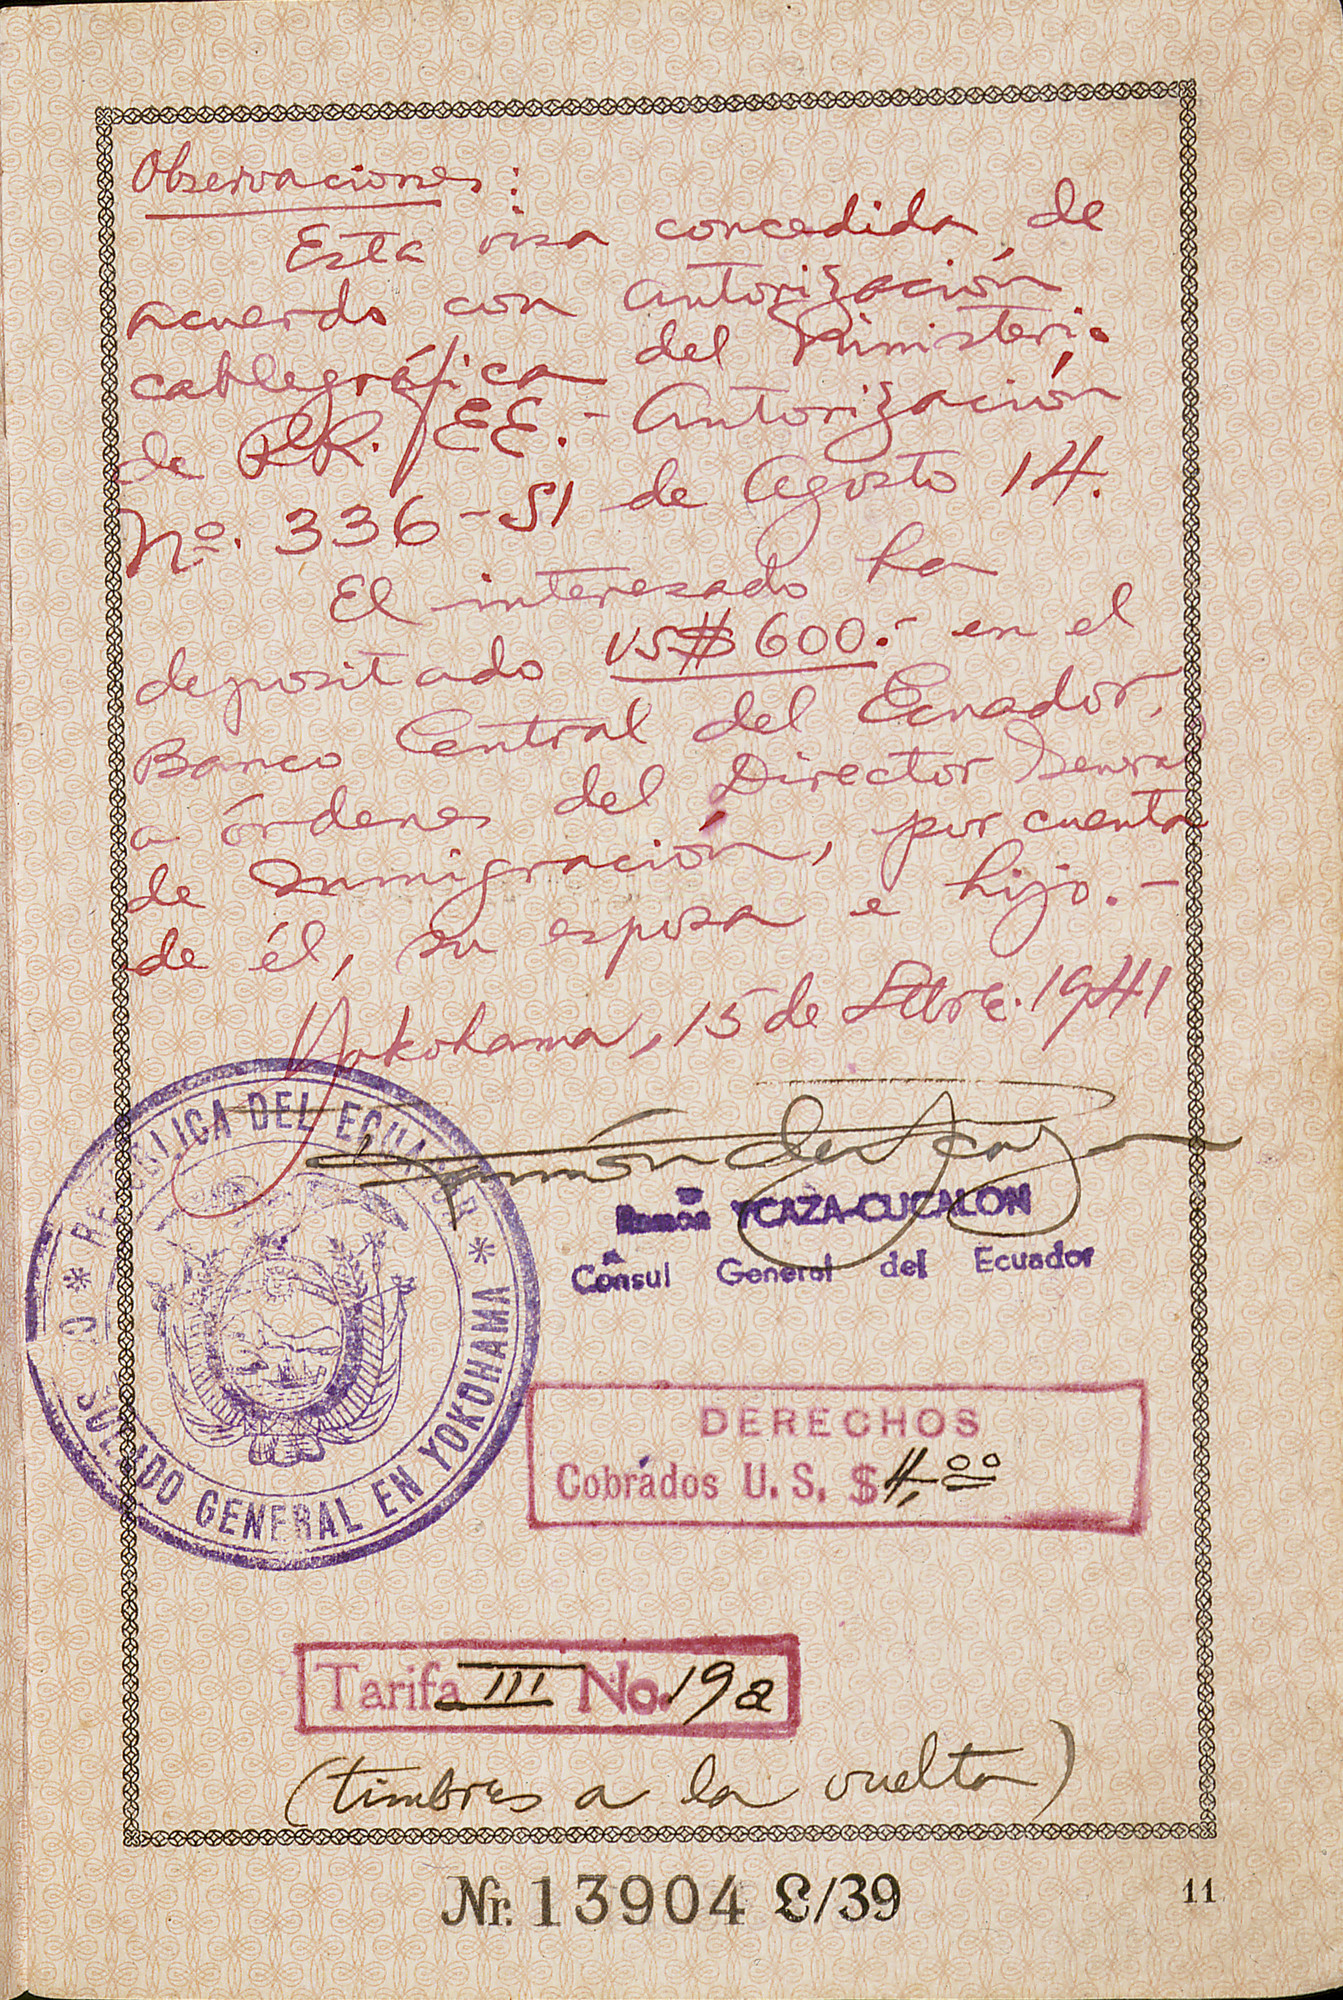 German passport issued to Moritz Sondheimer by the German Consulate in Kaunas.

German Jews were commonly required to add "Israel" to their names if male, and "Sara" if female.  Jewish passports were further distinguished by a "J," signifying "Jude" (Jew), stamped in red on the first page.